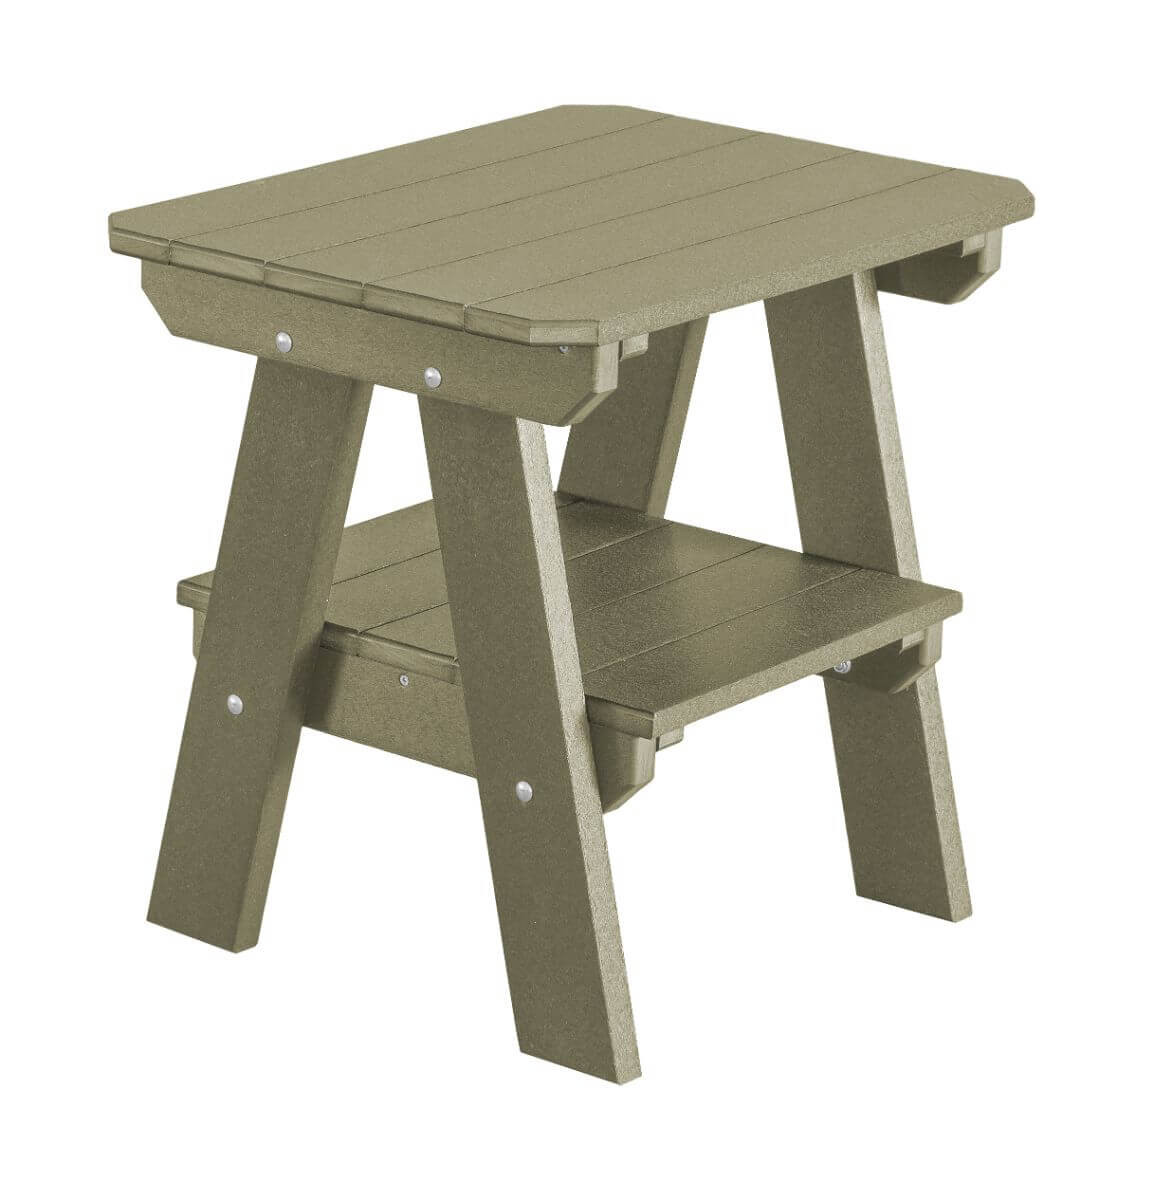 Olive Sidra Outdoor End Table